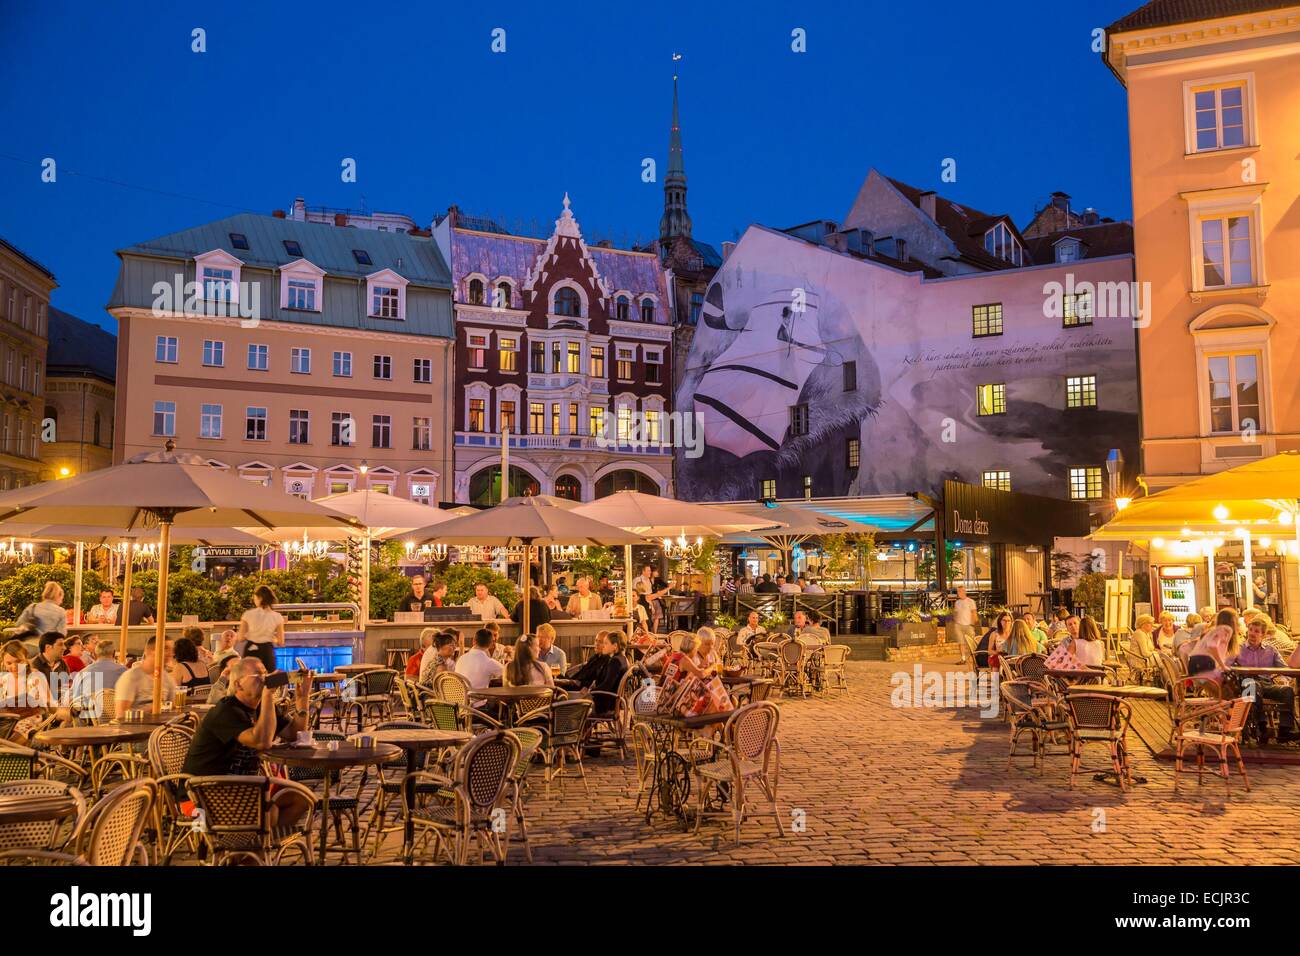 Latvia (Baltic States), Riga, European capital of culture 2014, historical centre listed as World Heritage by UNESCO, terrasses in the city center, street Tirgonu with a view of the church bell tower Saint Peter Stock Photo